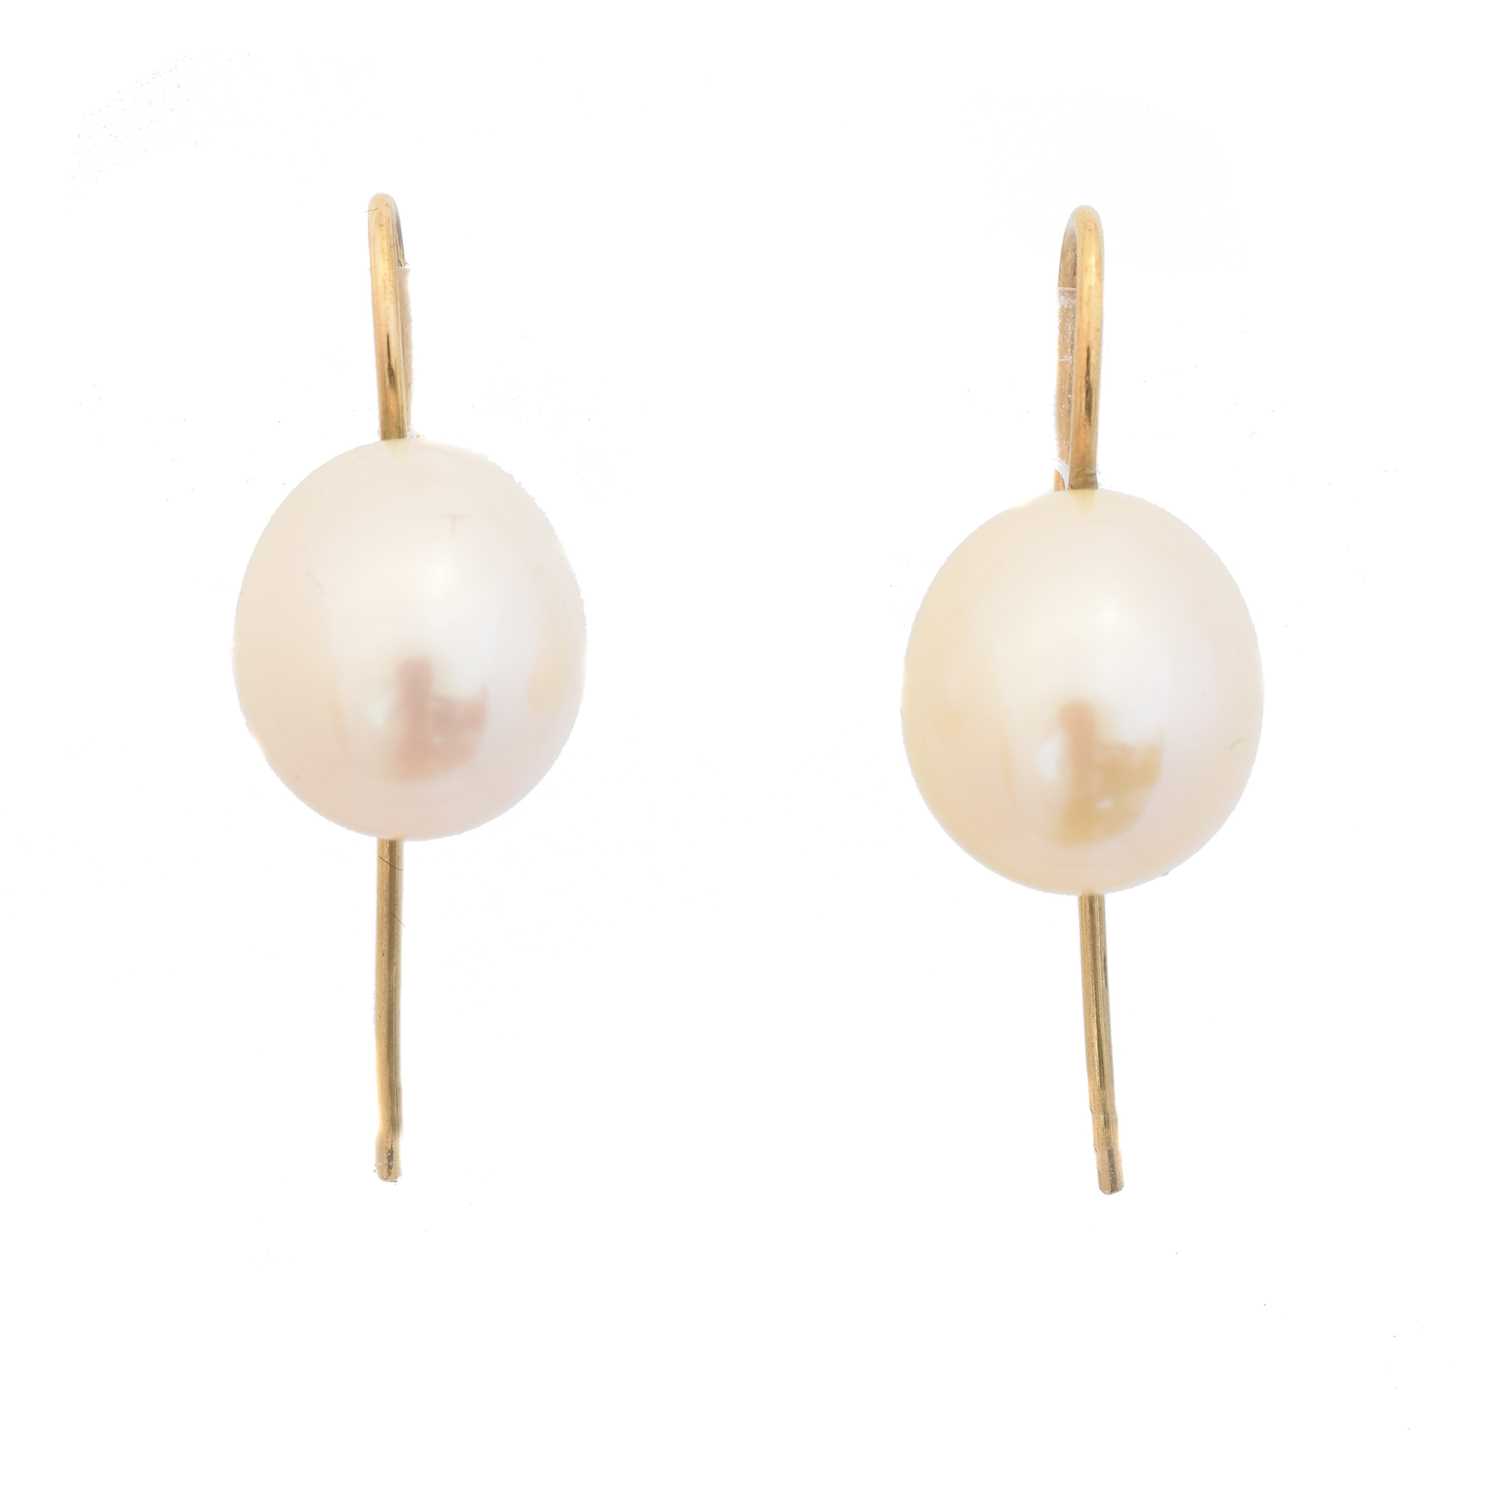 Lot 55 - A pair of cultured pearl drop earrings by Annoushka